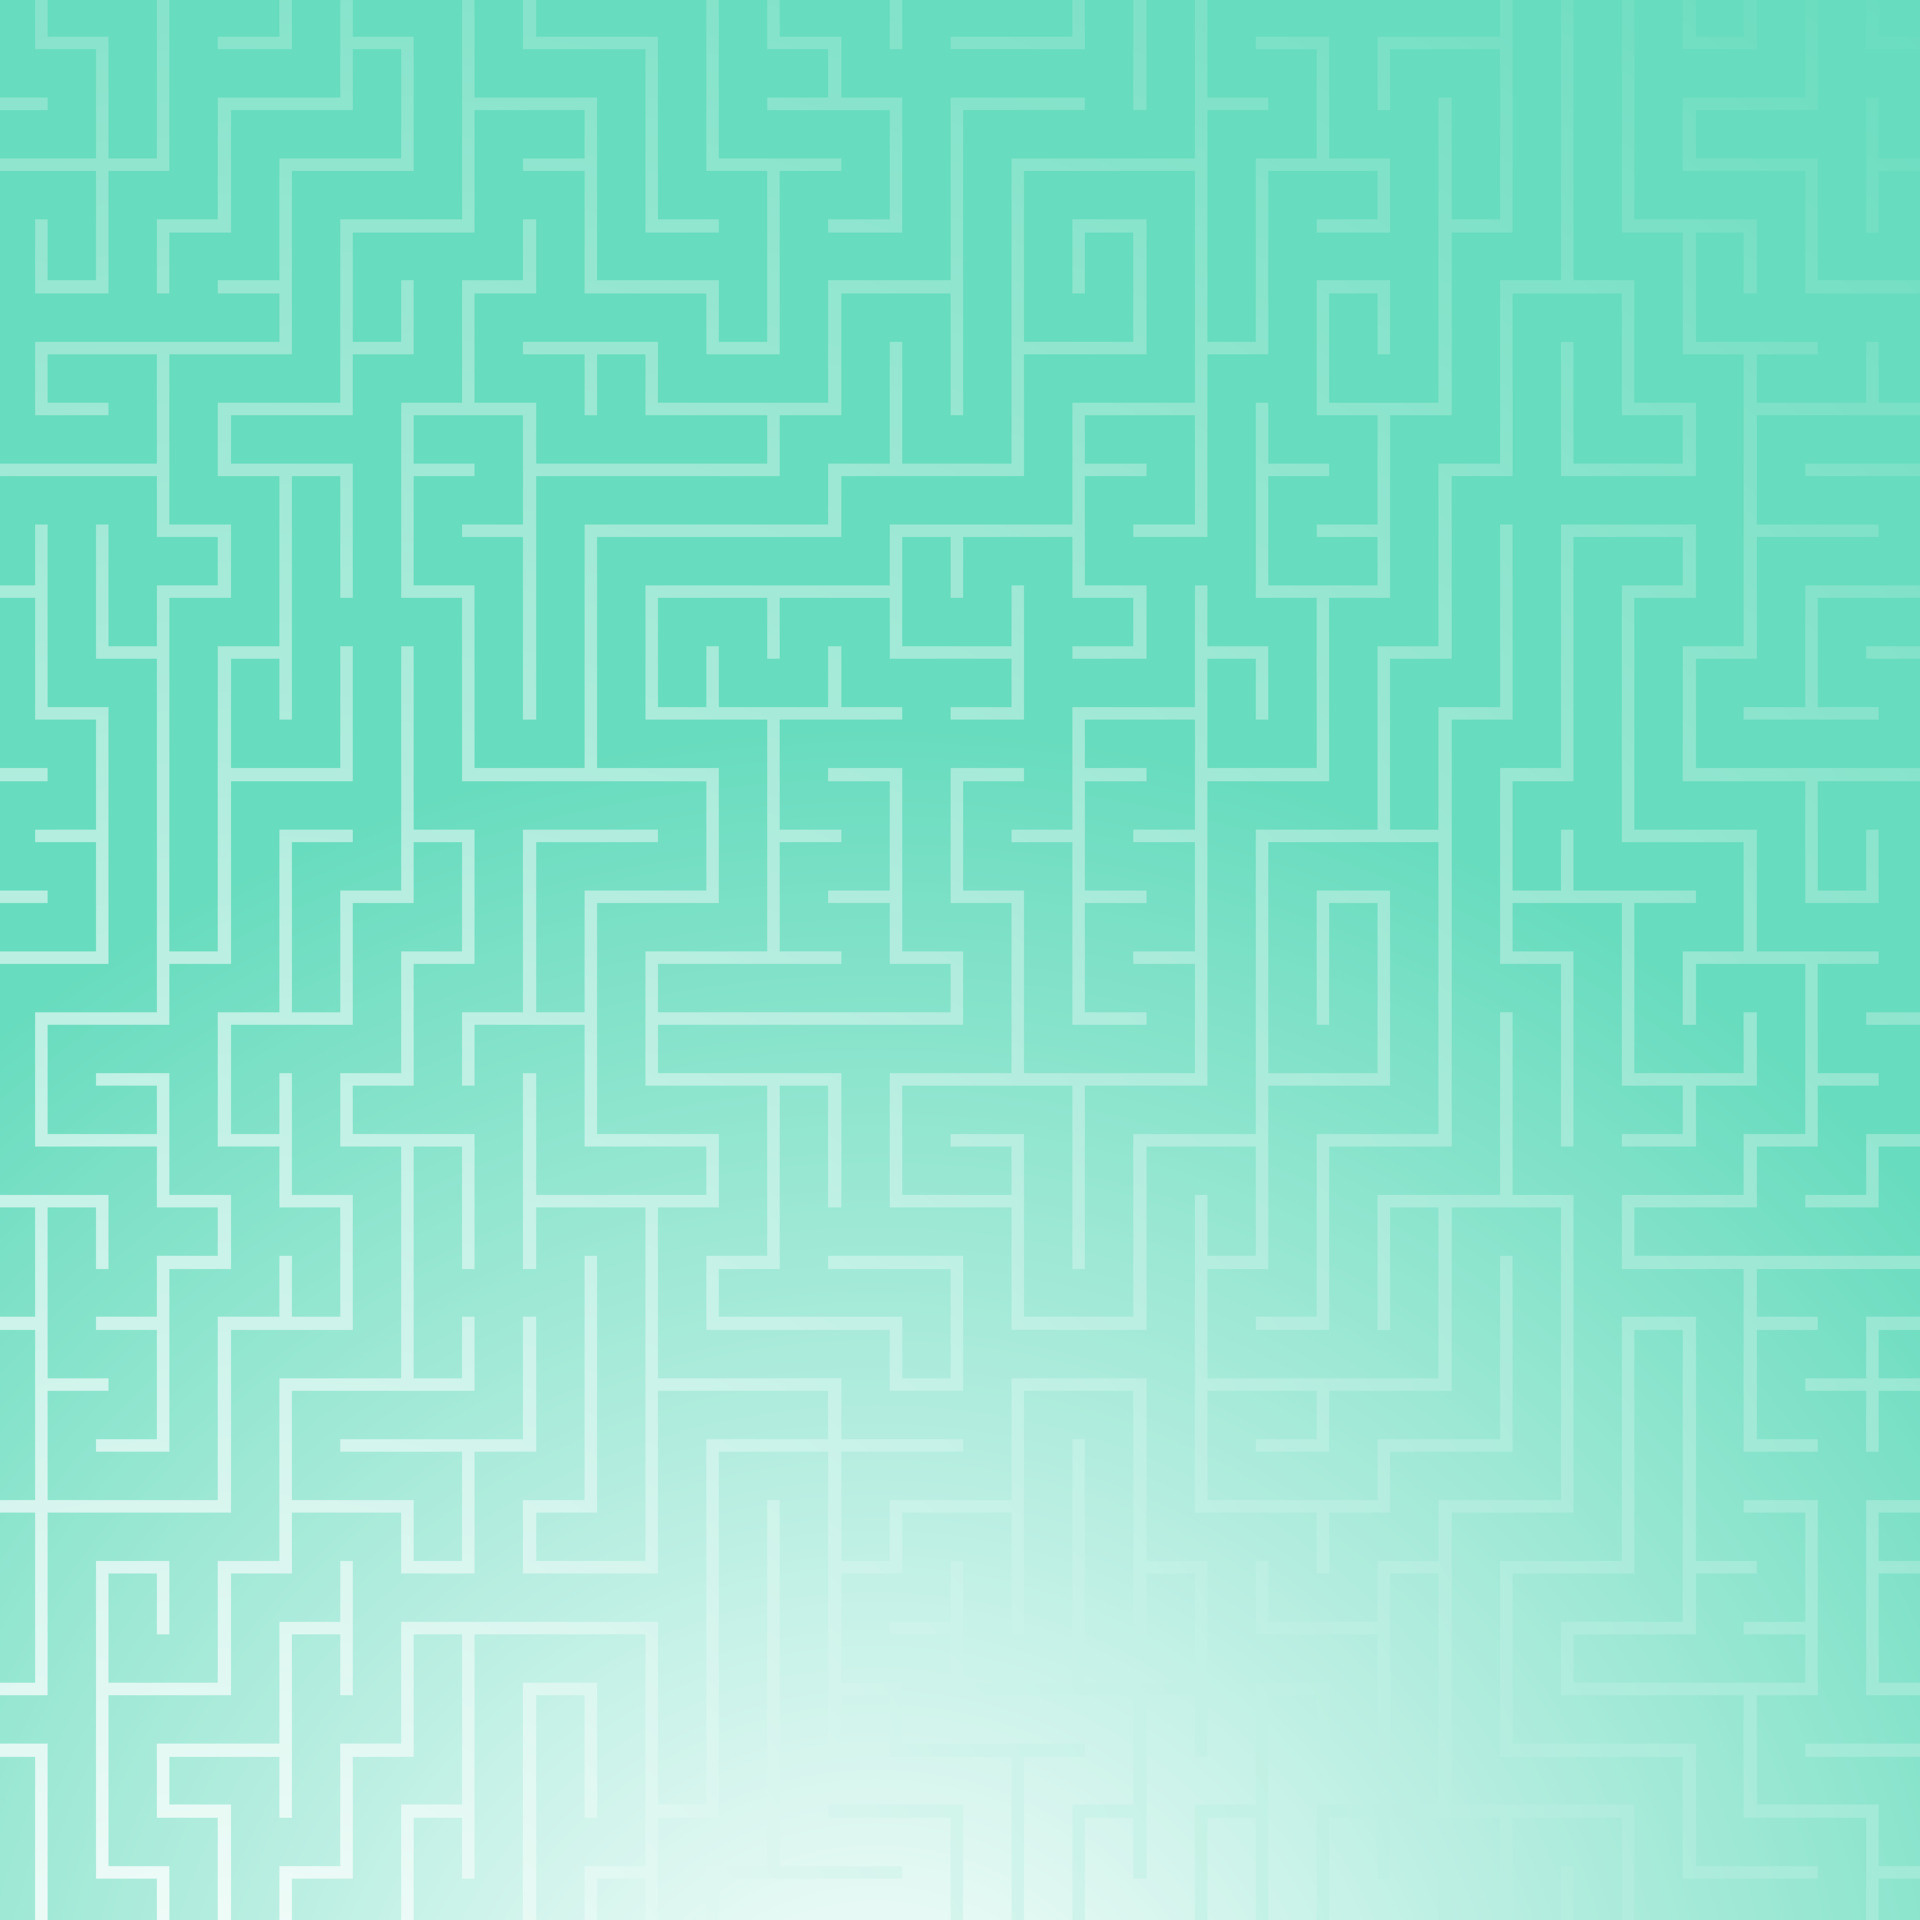 Square color maze pattern, Flat vector illustration, Paper wallpapers fabrics, 1920x1920 HD Handy